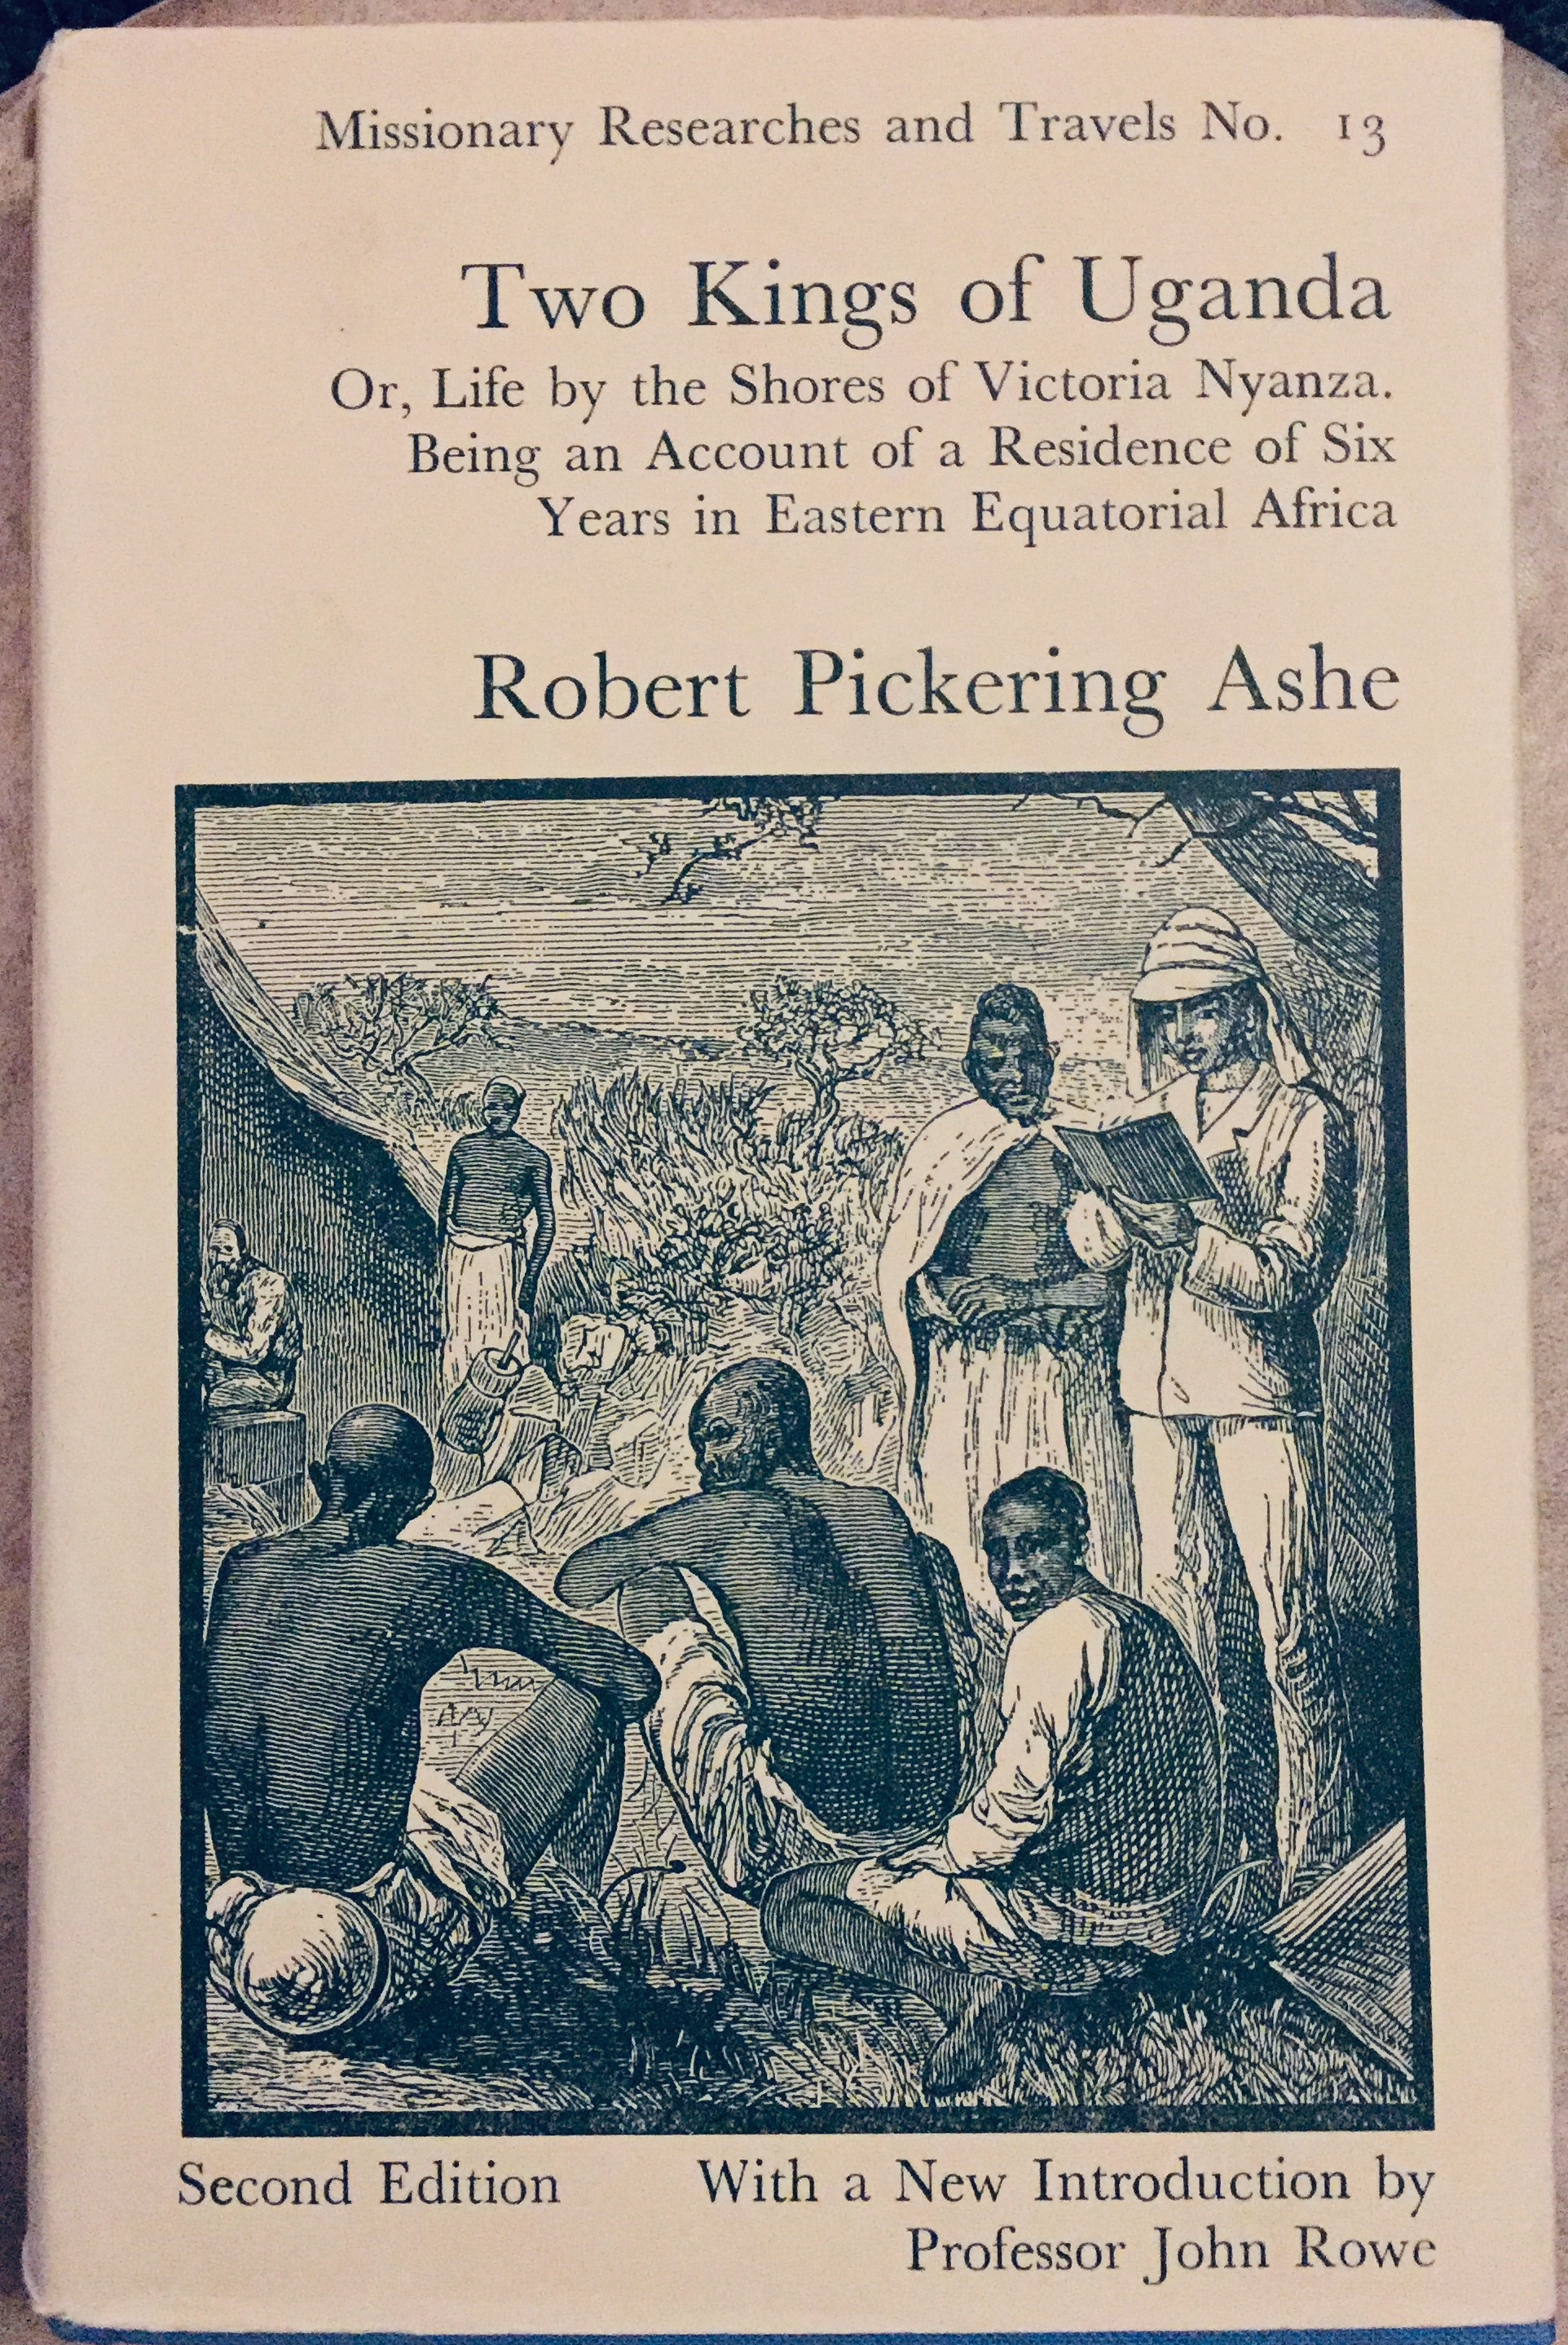 Two Kings of Uganda, or Life by the Shores of Victoria Nyanza, Being an Account of a Residence of Six Years in Eastern Equatorial Africa - By Robert Pickering Ashe.